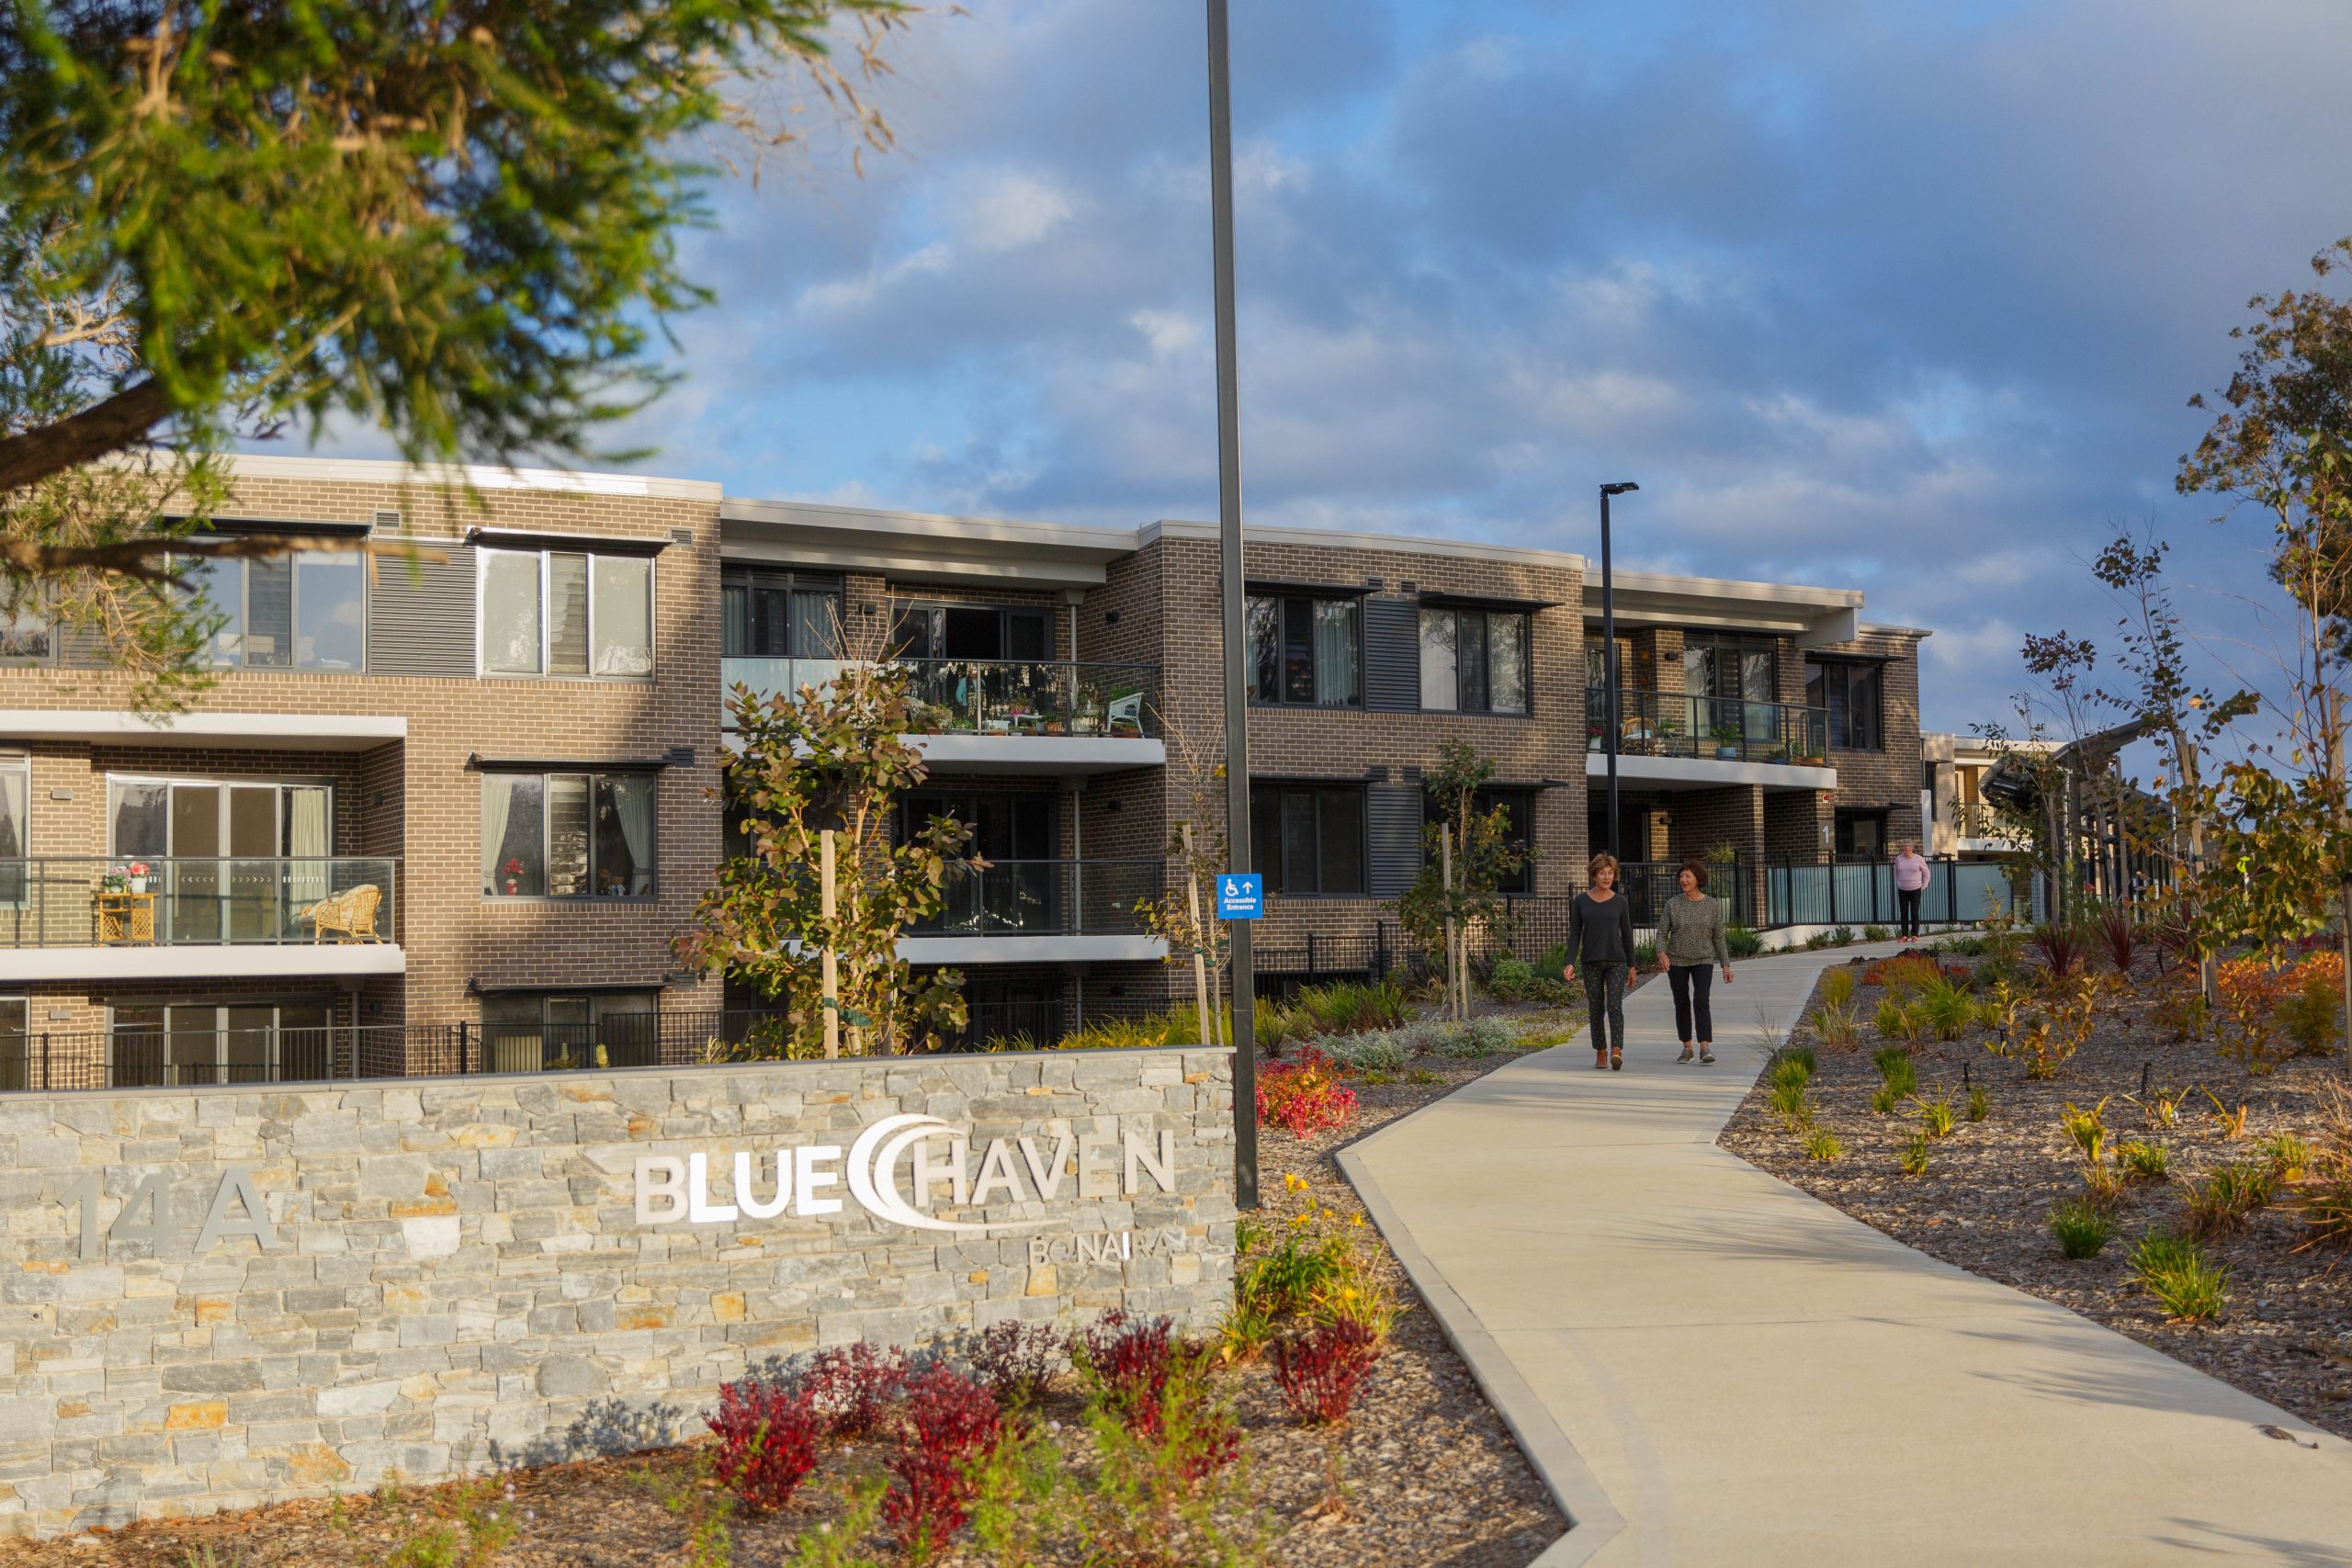 Blue Haven Advisory Board to be remodelled